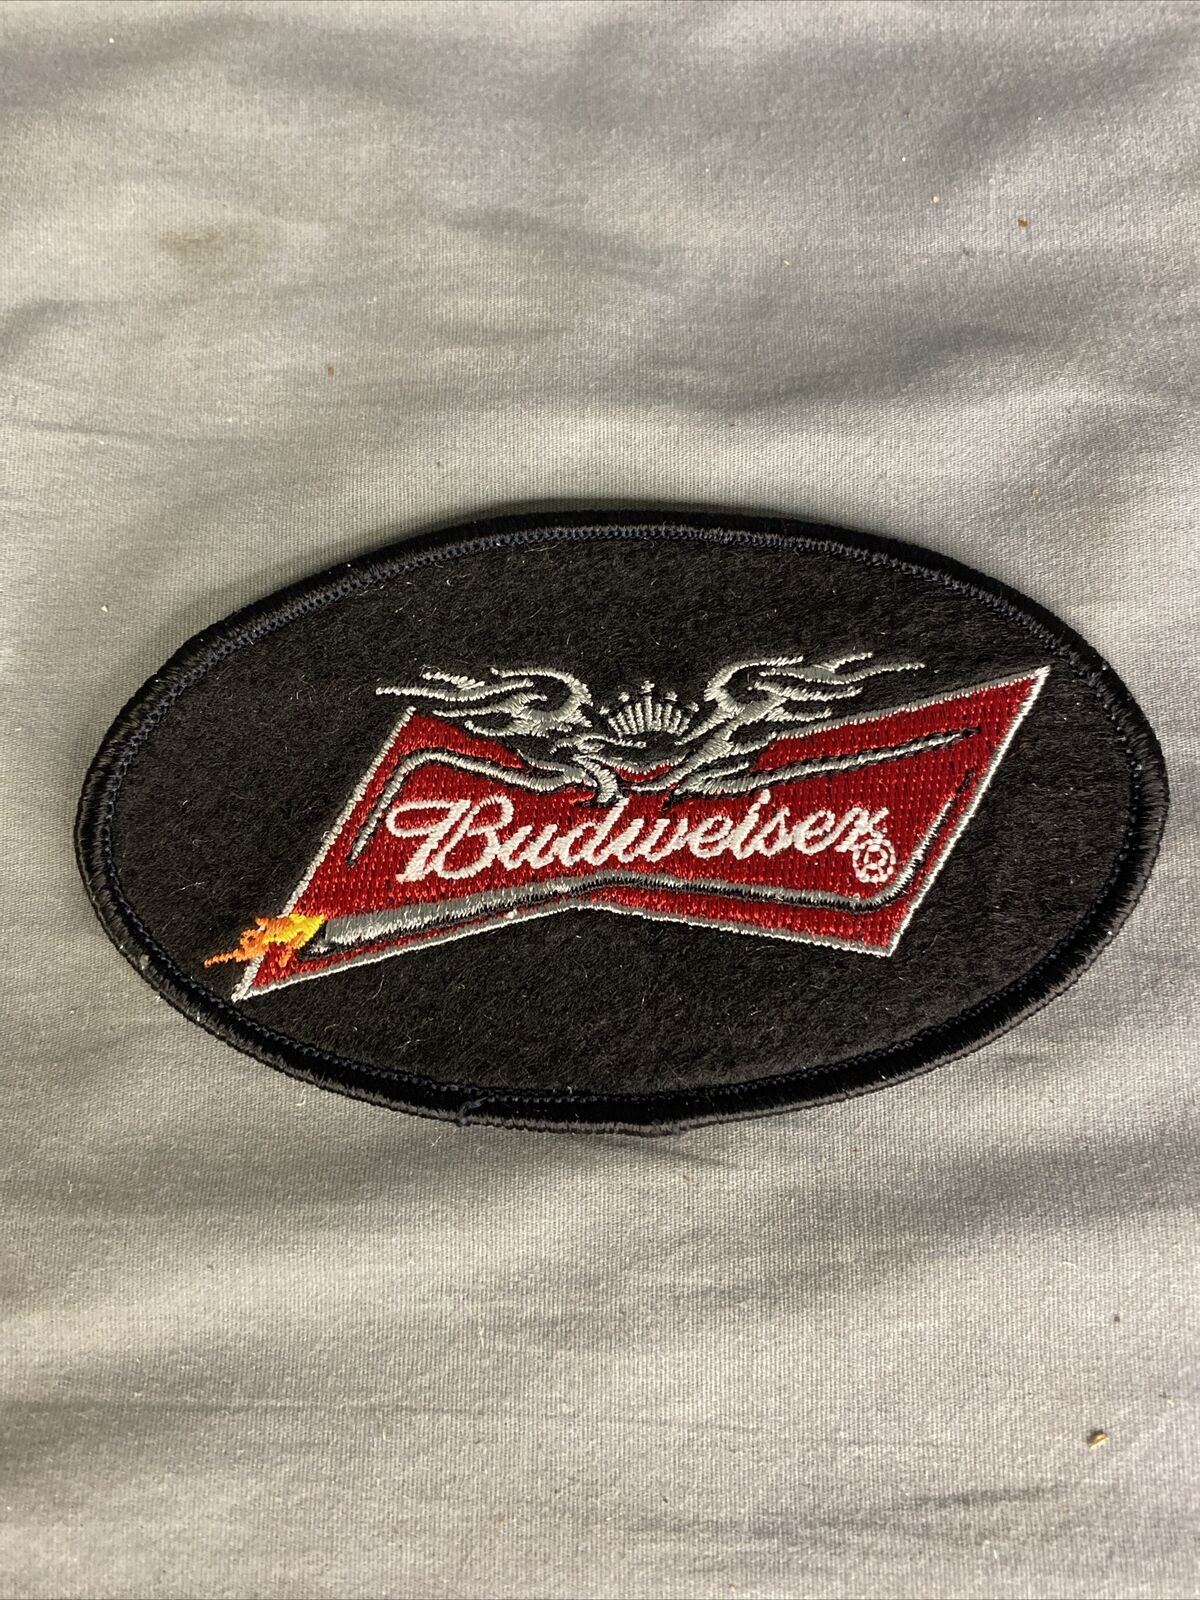 Budweiser Patch Black Oval New Iron On 4.5” 